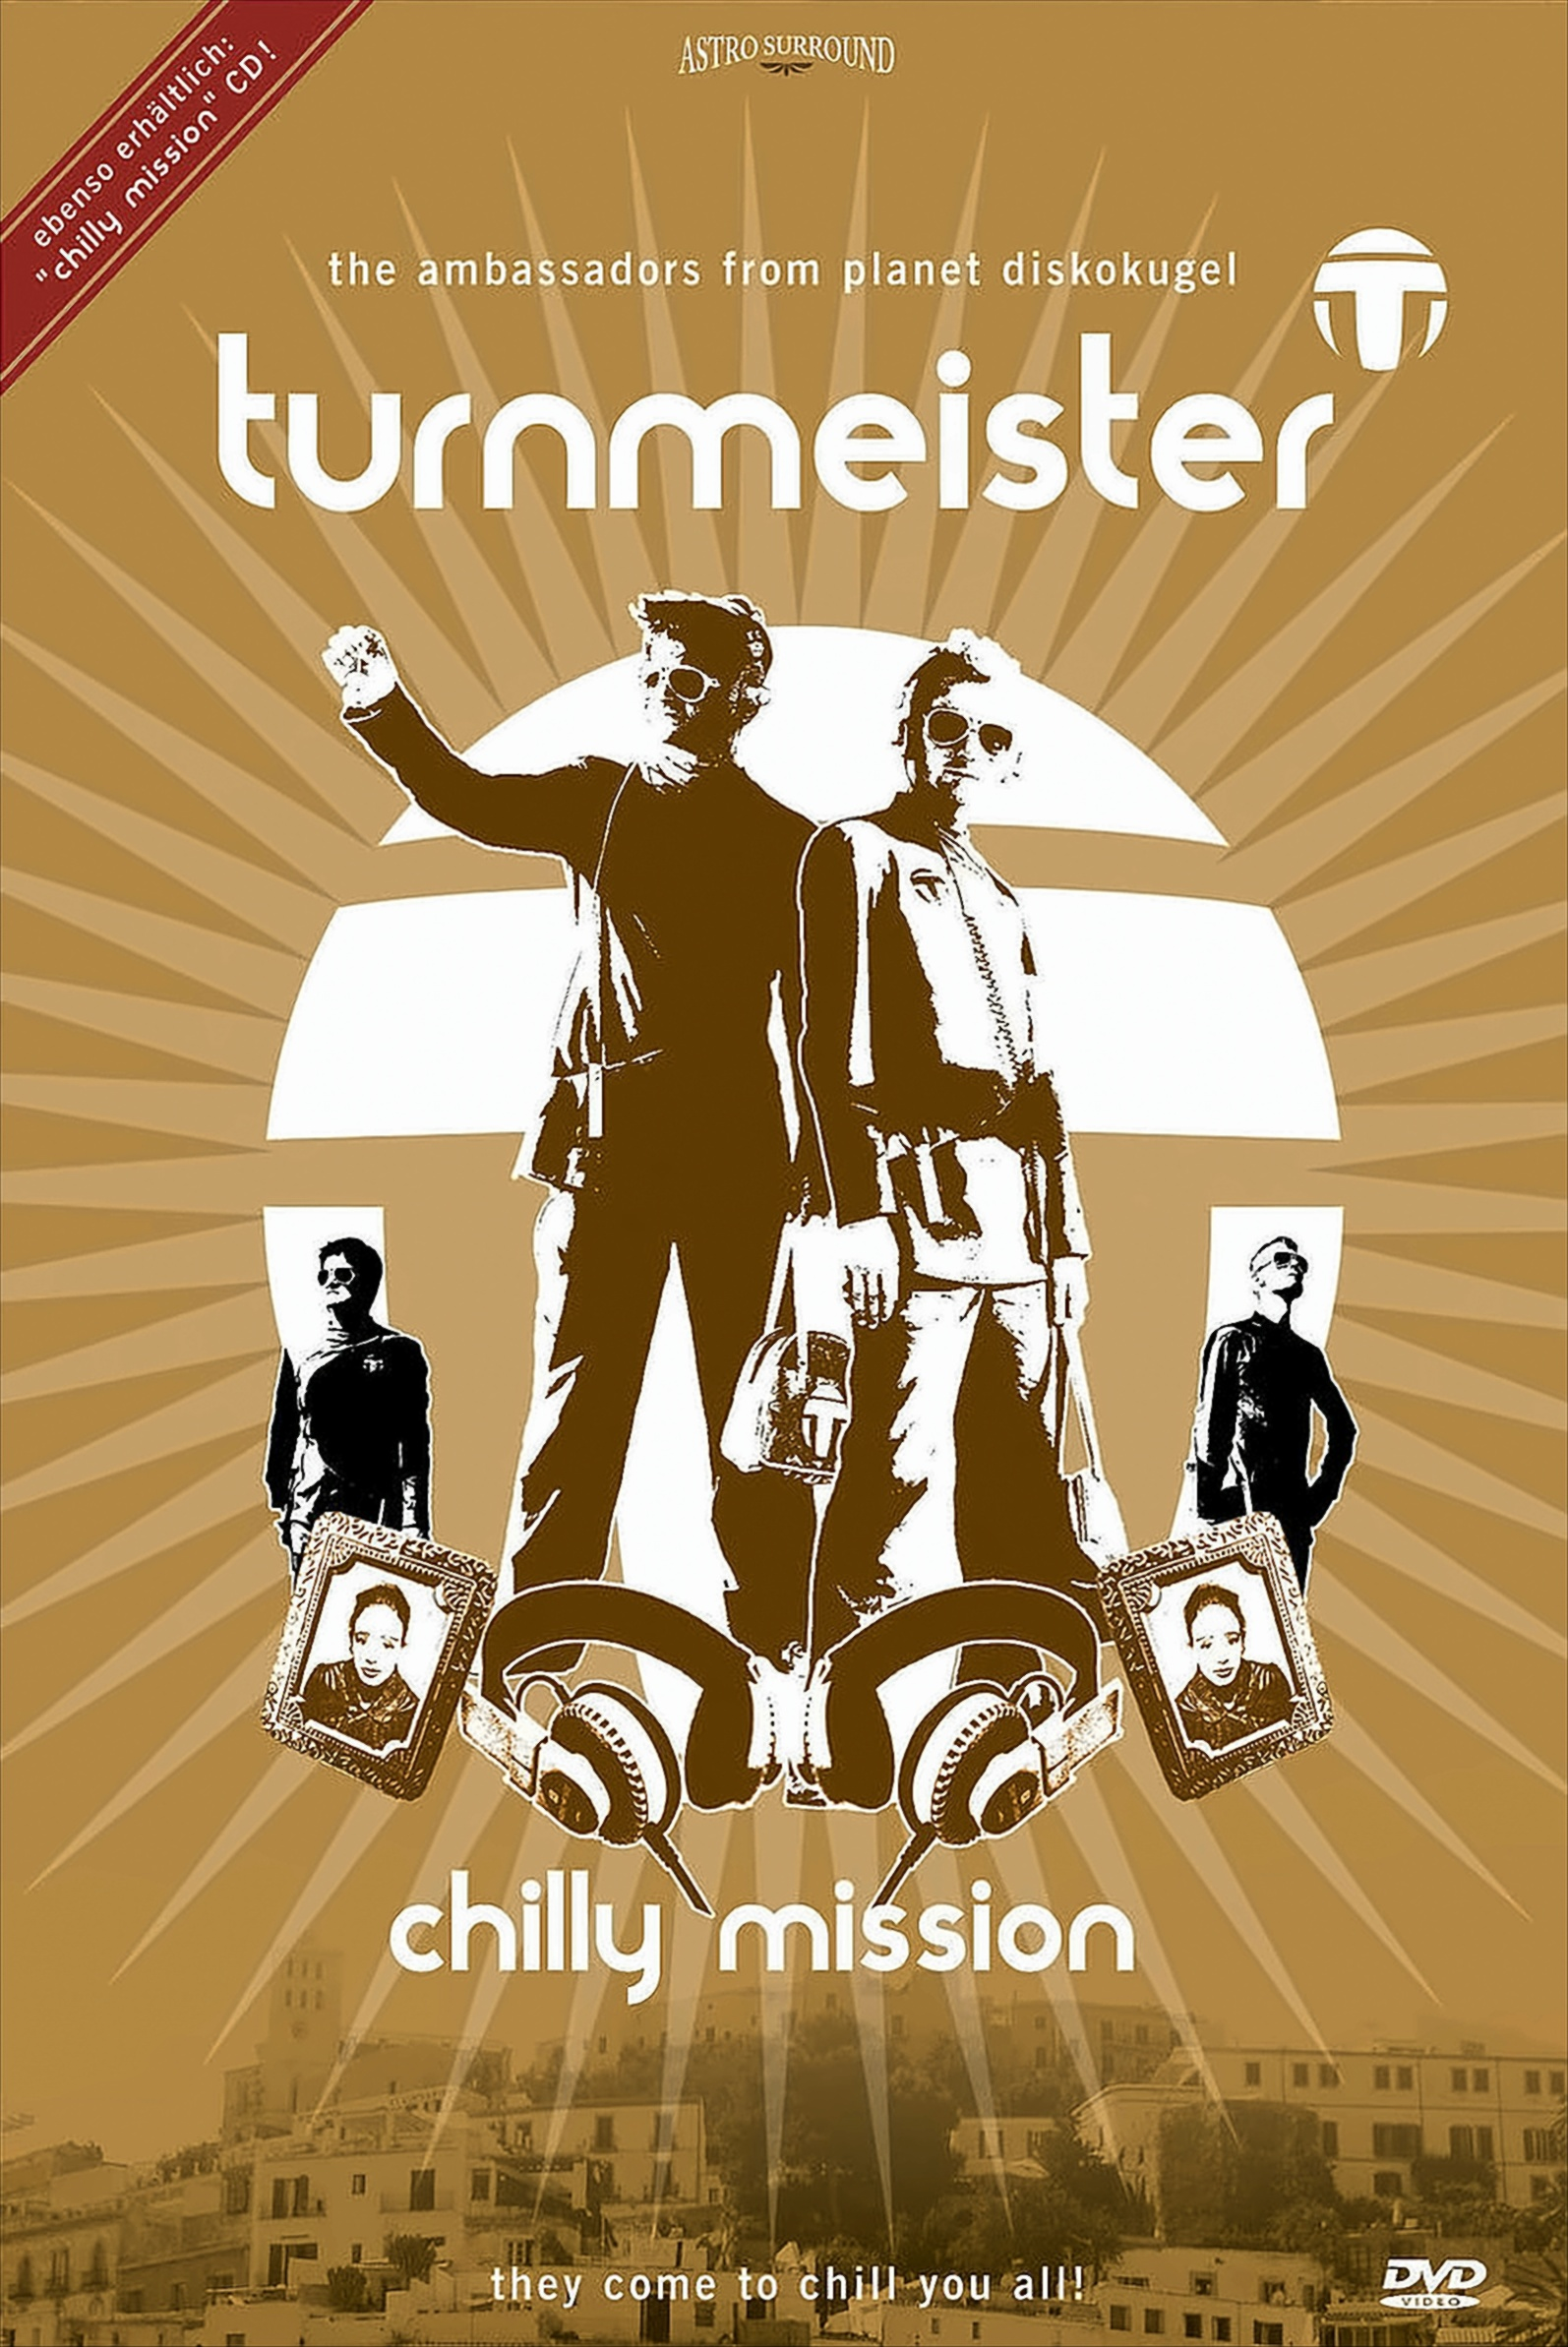 Chilly - Turnmeister Mission DVD